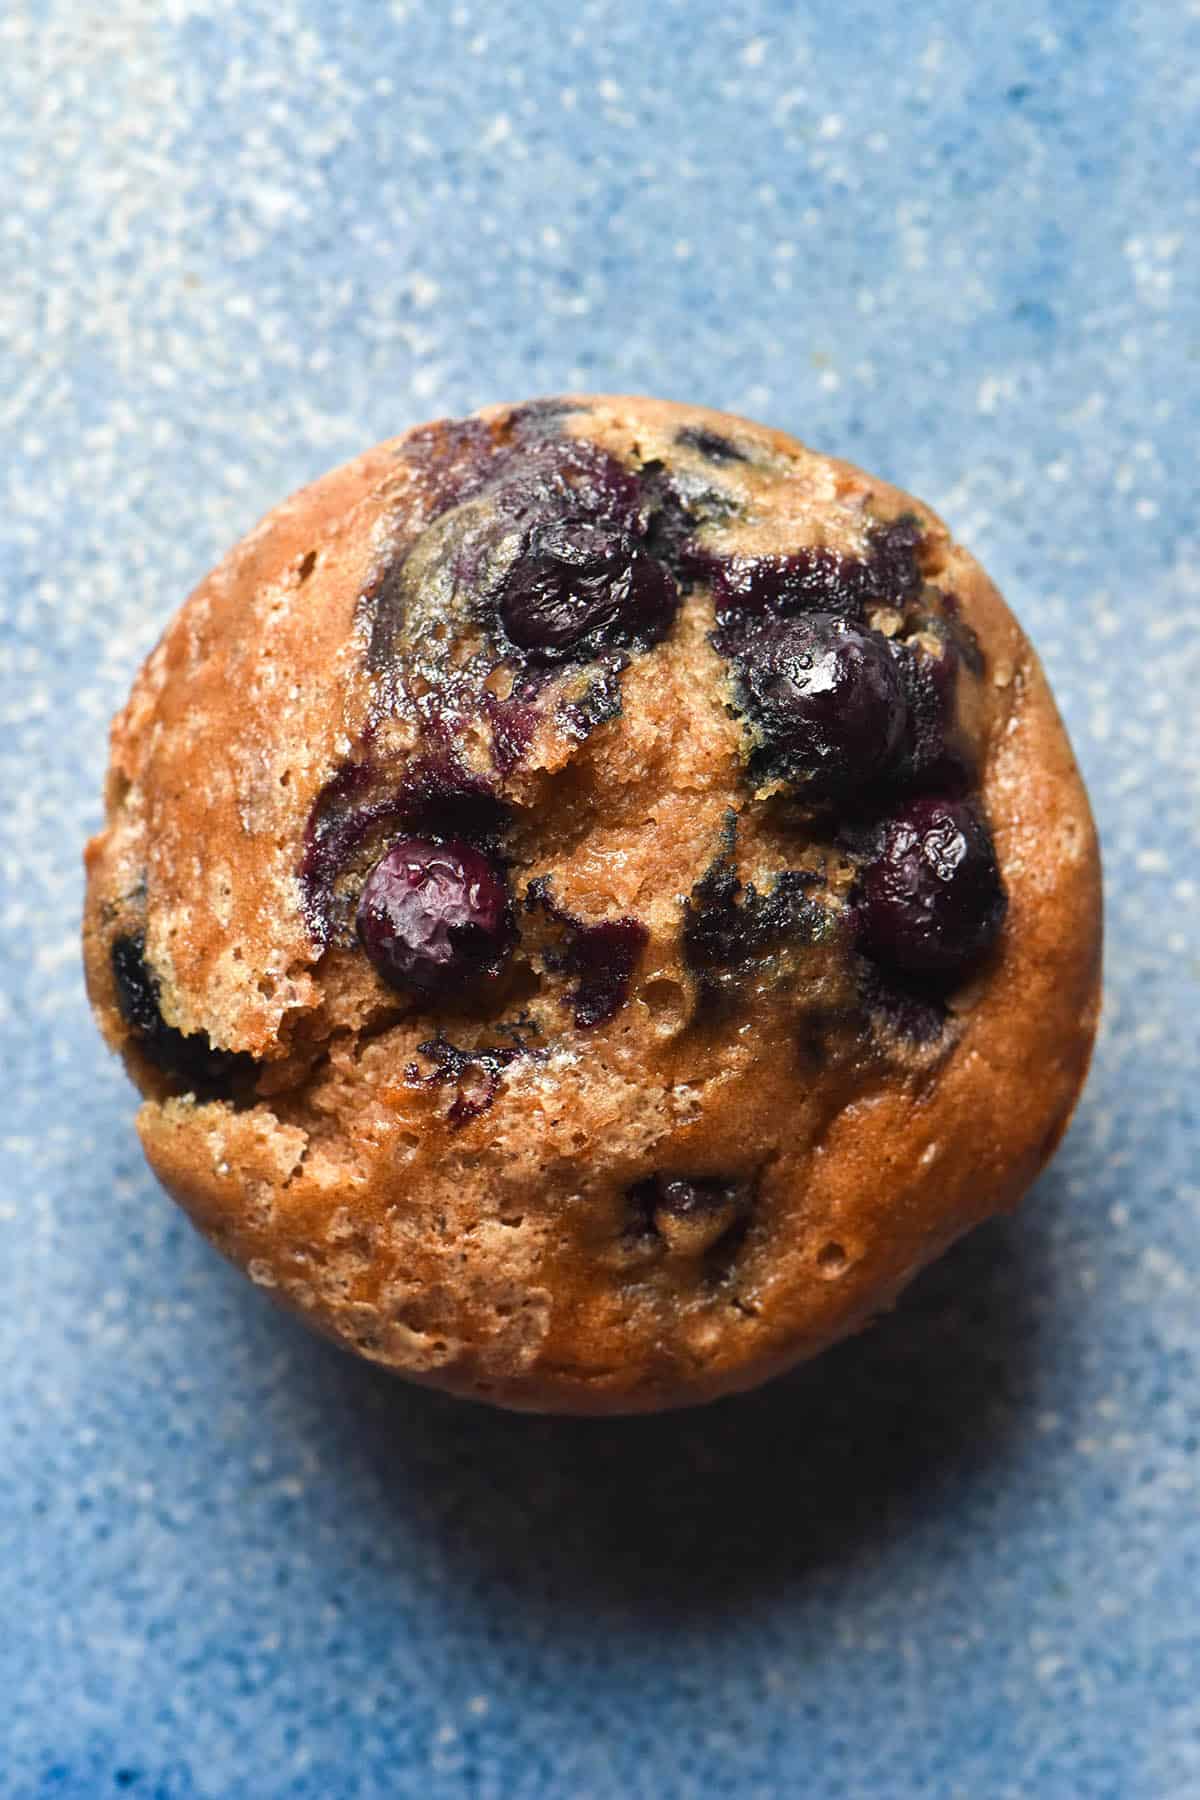 An aerial image of a gluten free buckwheat muffin topped with blueberries and granulated sugar on a bright blue ceramic plate.